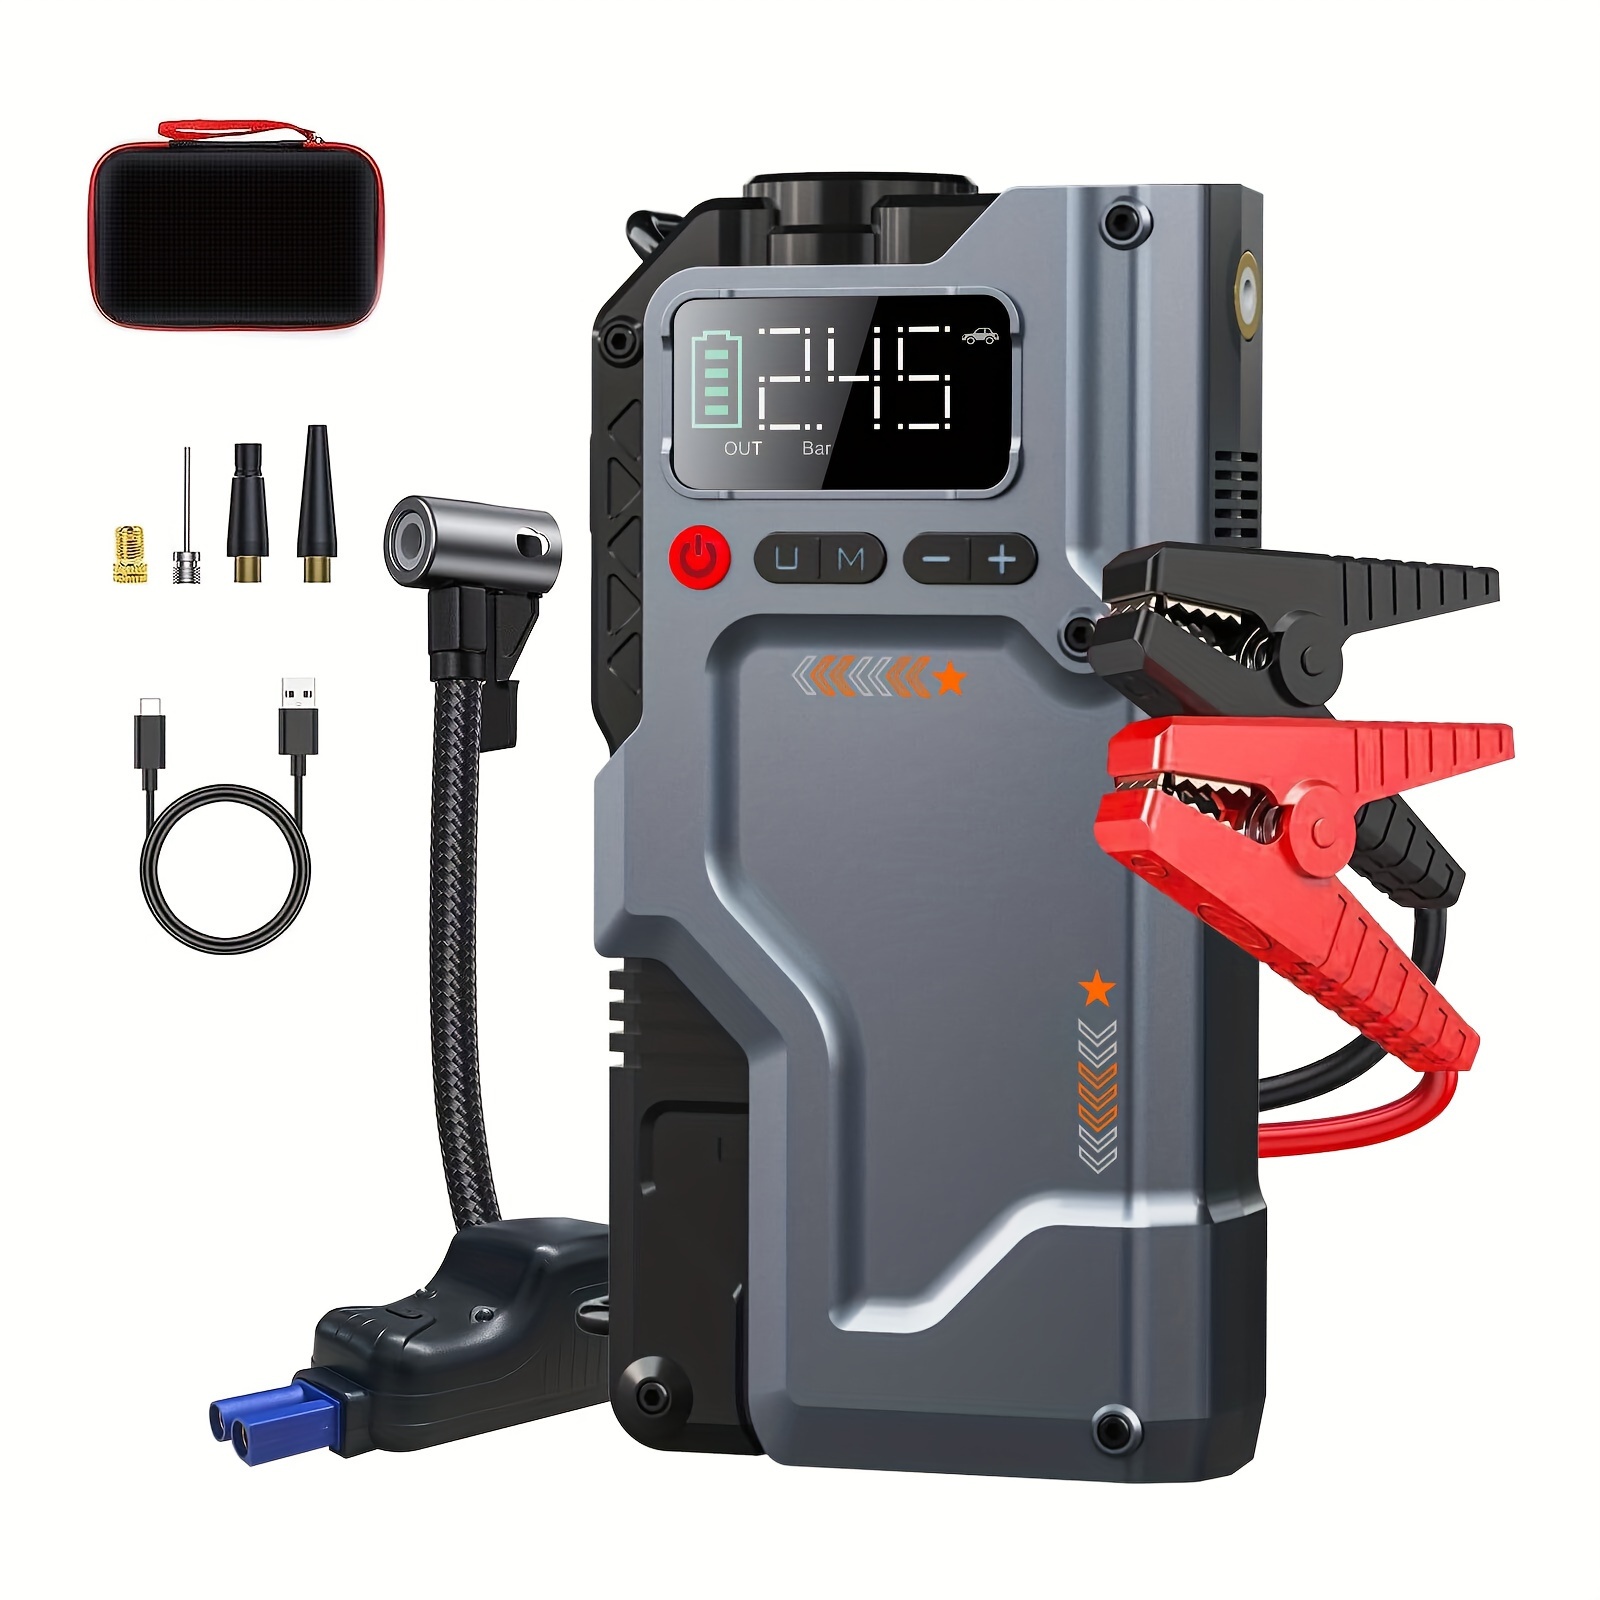 

Jump Starter With Air Compressor, 5 In 1 Function Jump Box 6000a 150psi Pack With Digital Tire Inflator, Car Battery Charger Portable For 8.5l Gas Or 7.0l